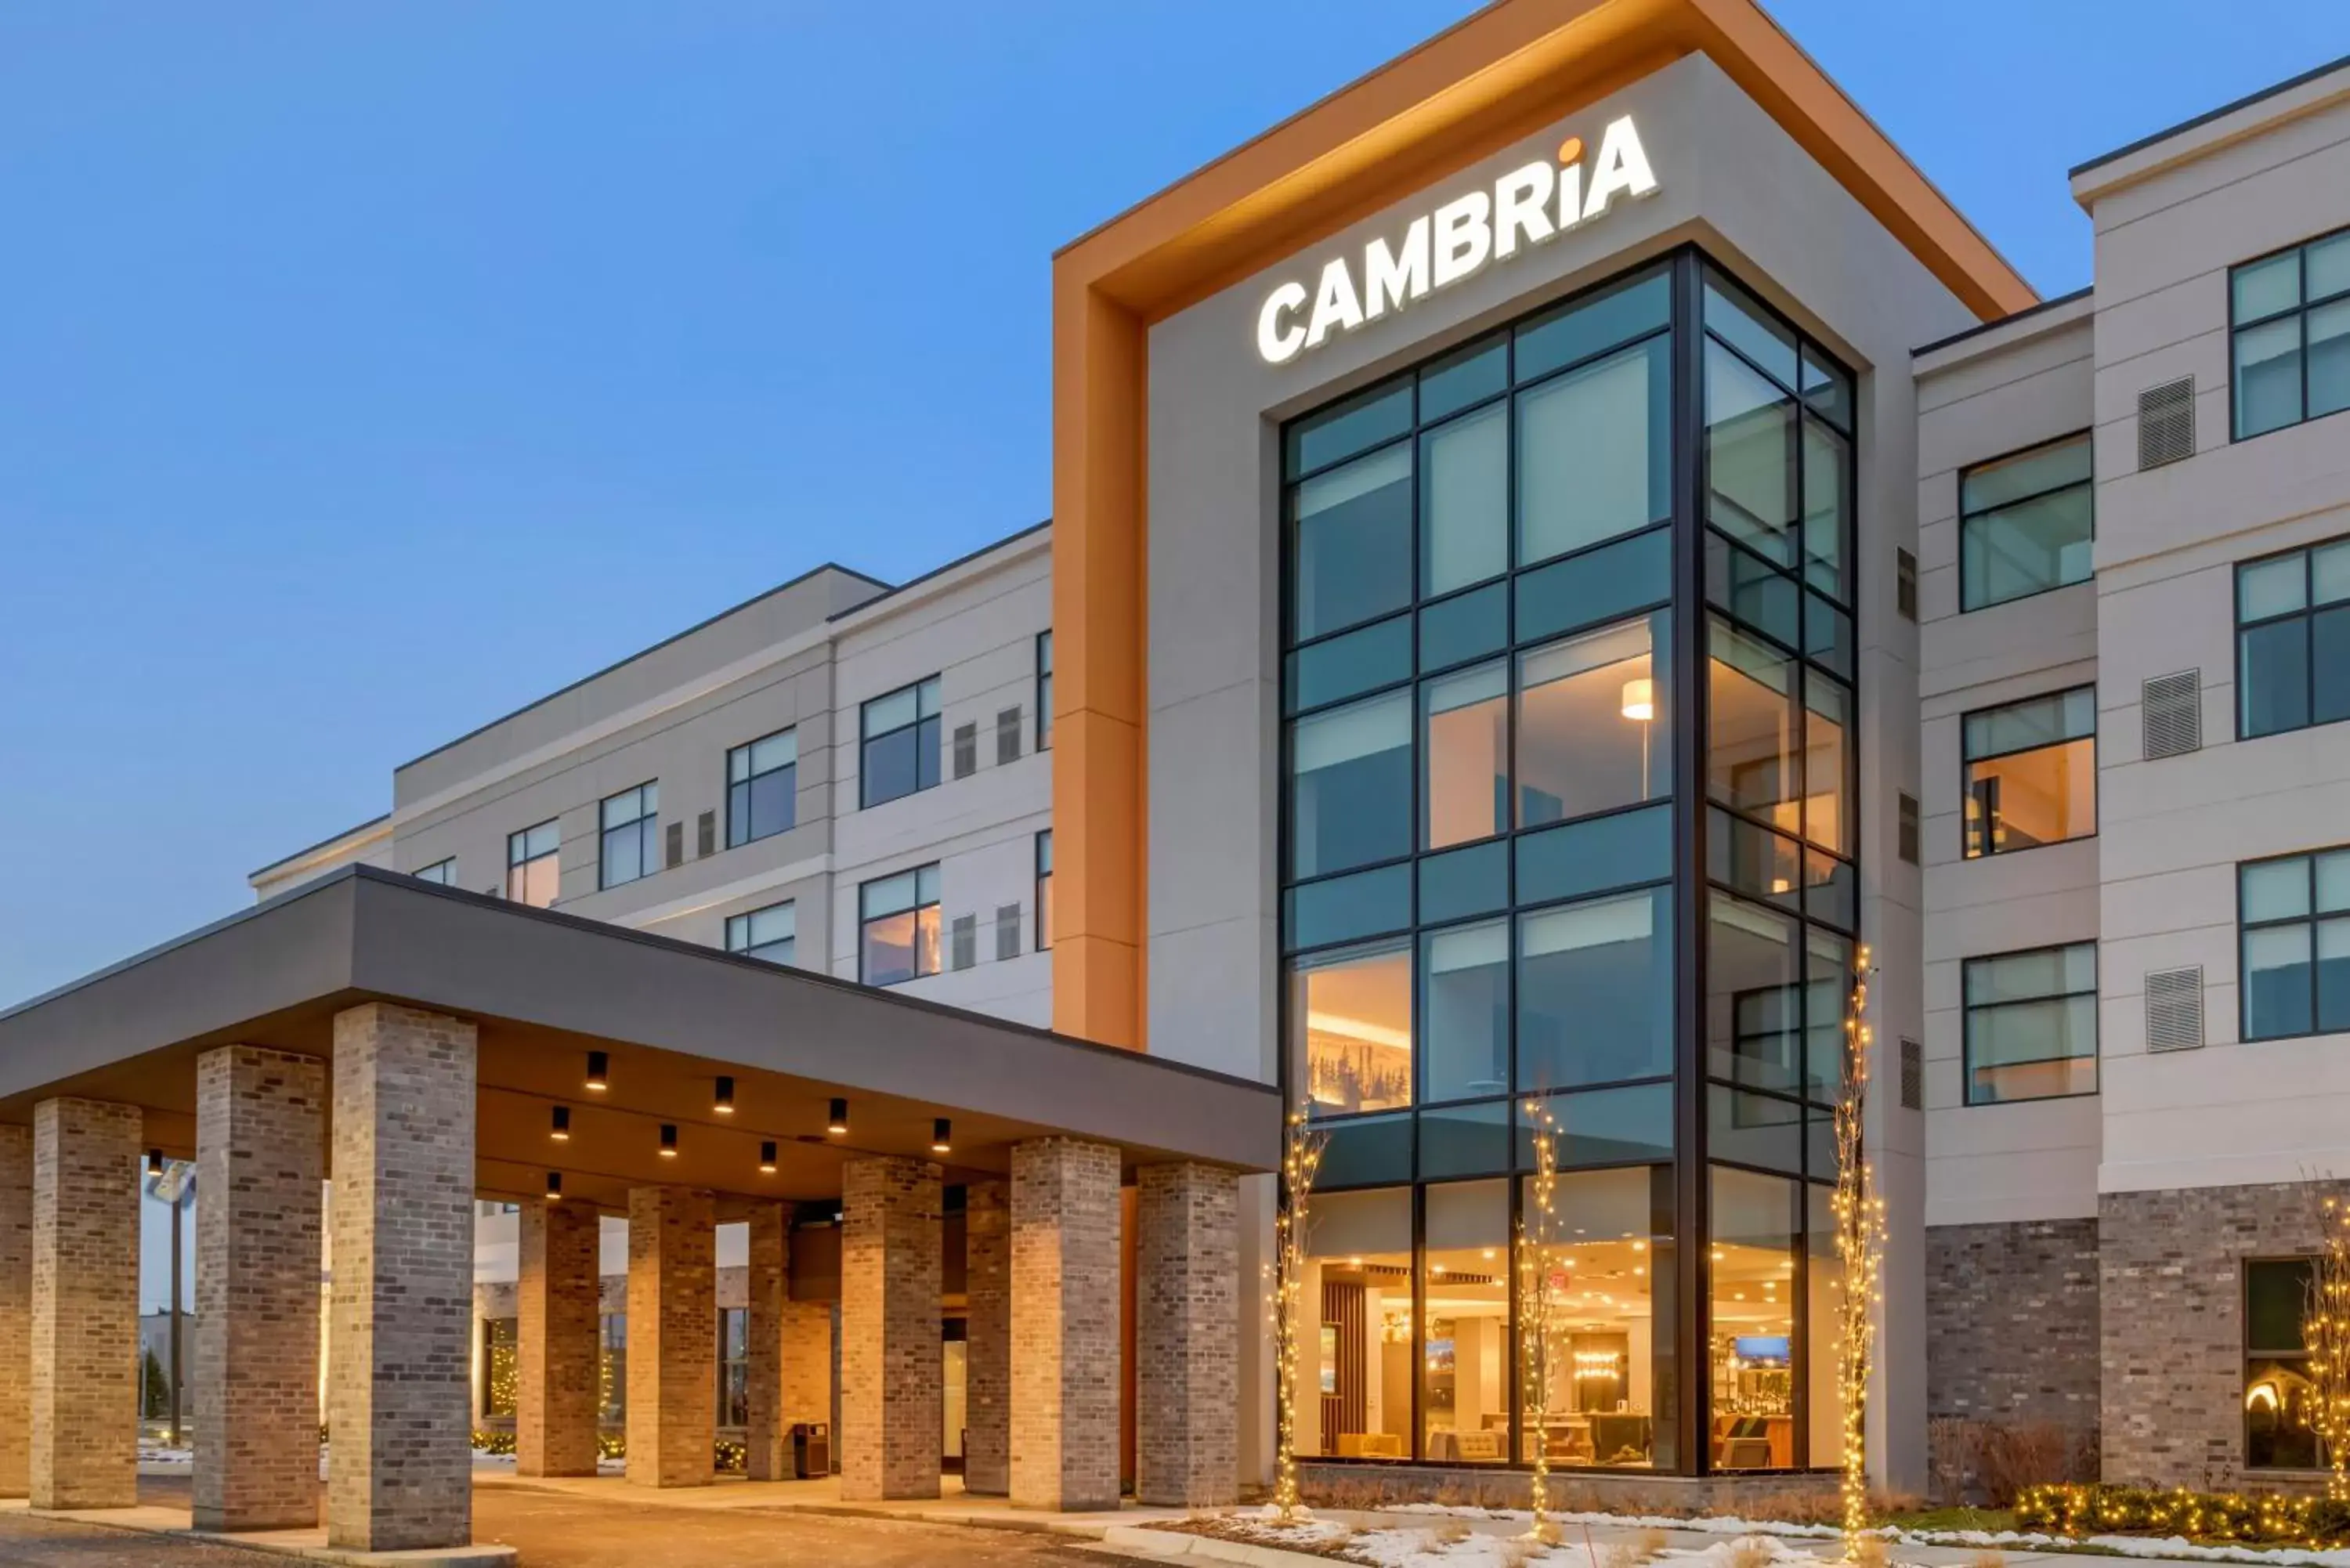 Property building in Cambria Hotel Detroit-Shelby Township